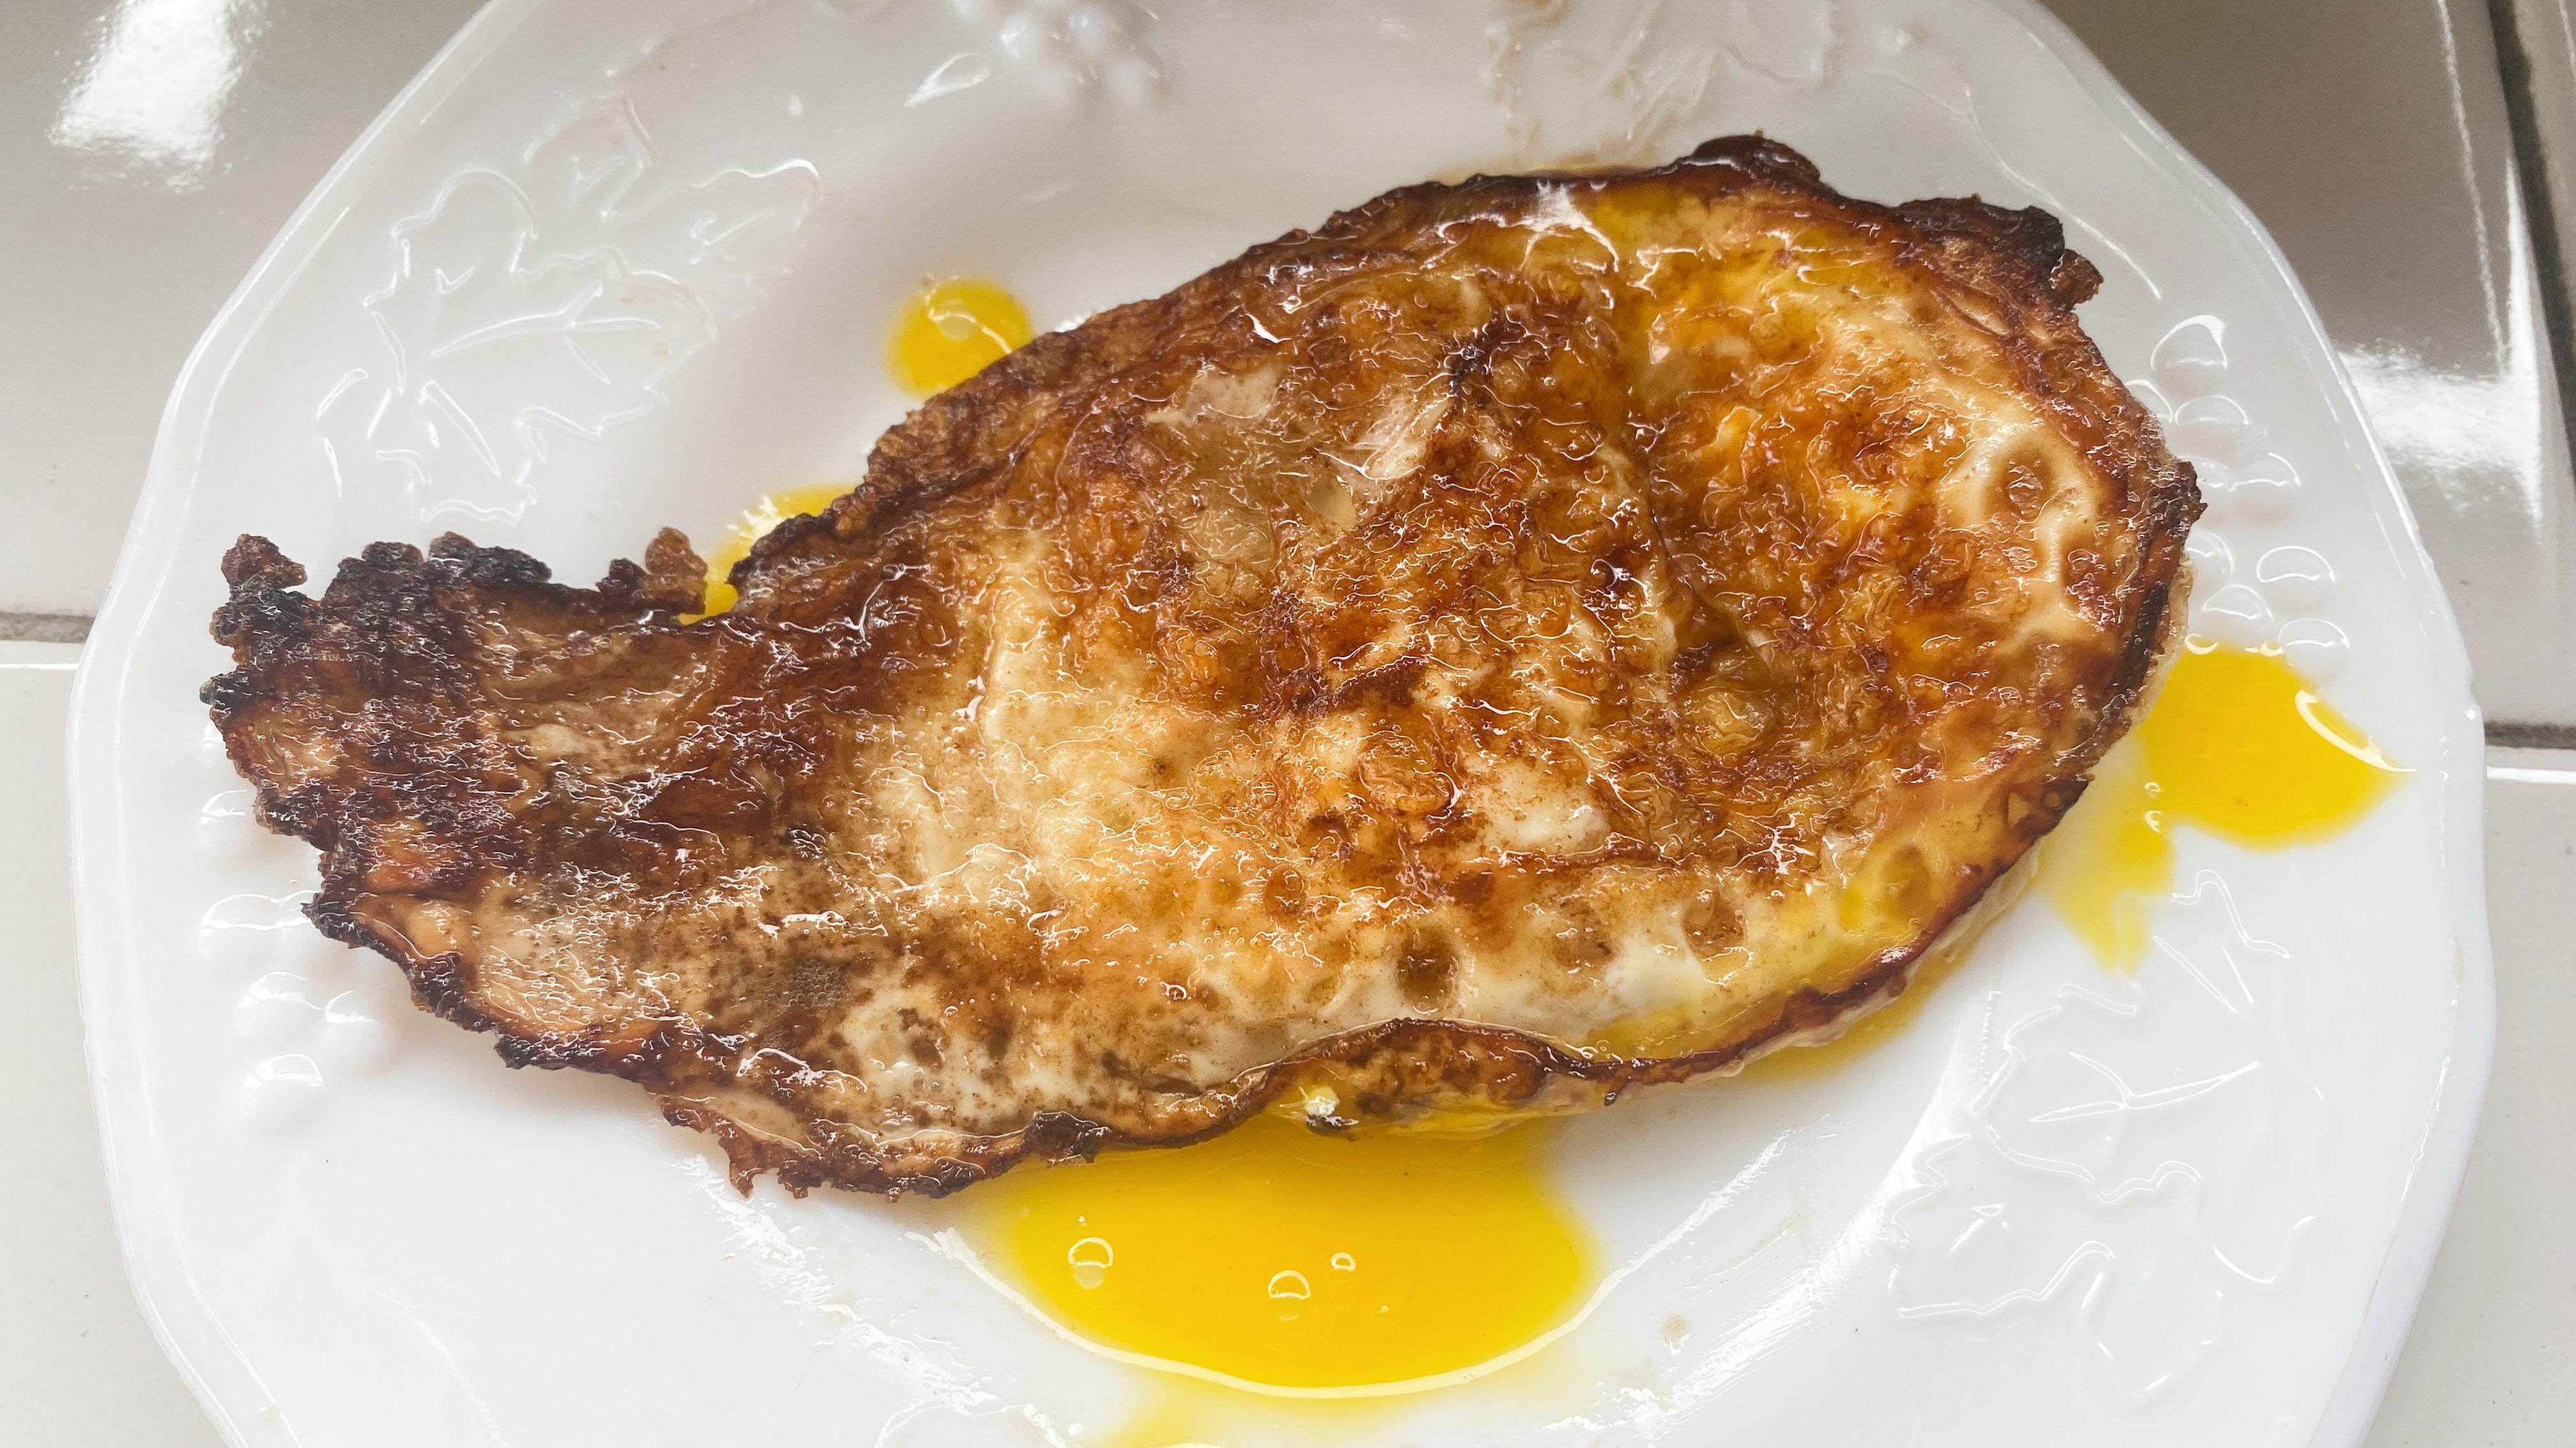 The bottom of an egg fried in butter. (Photo: Claire Lower)